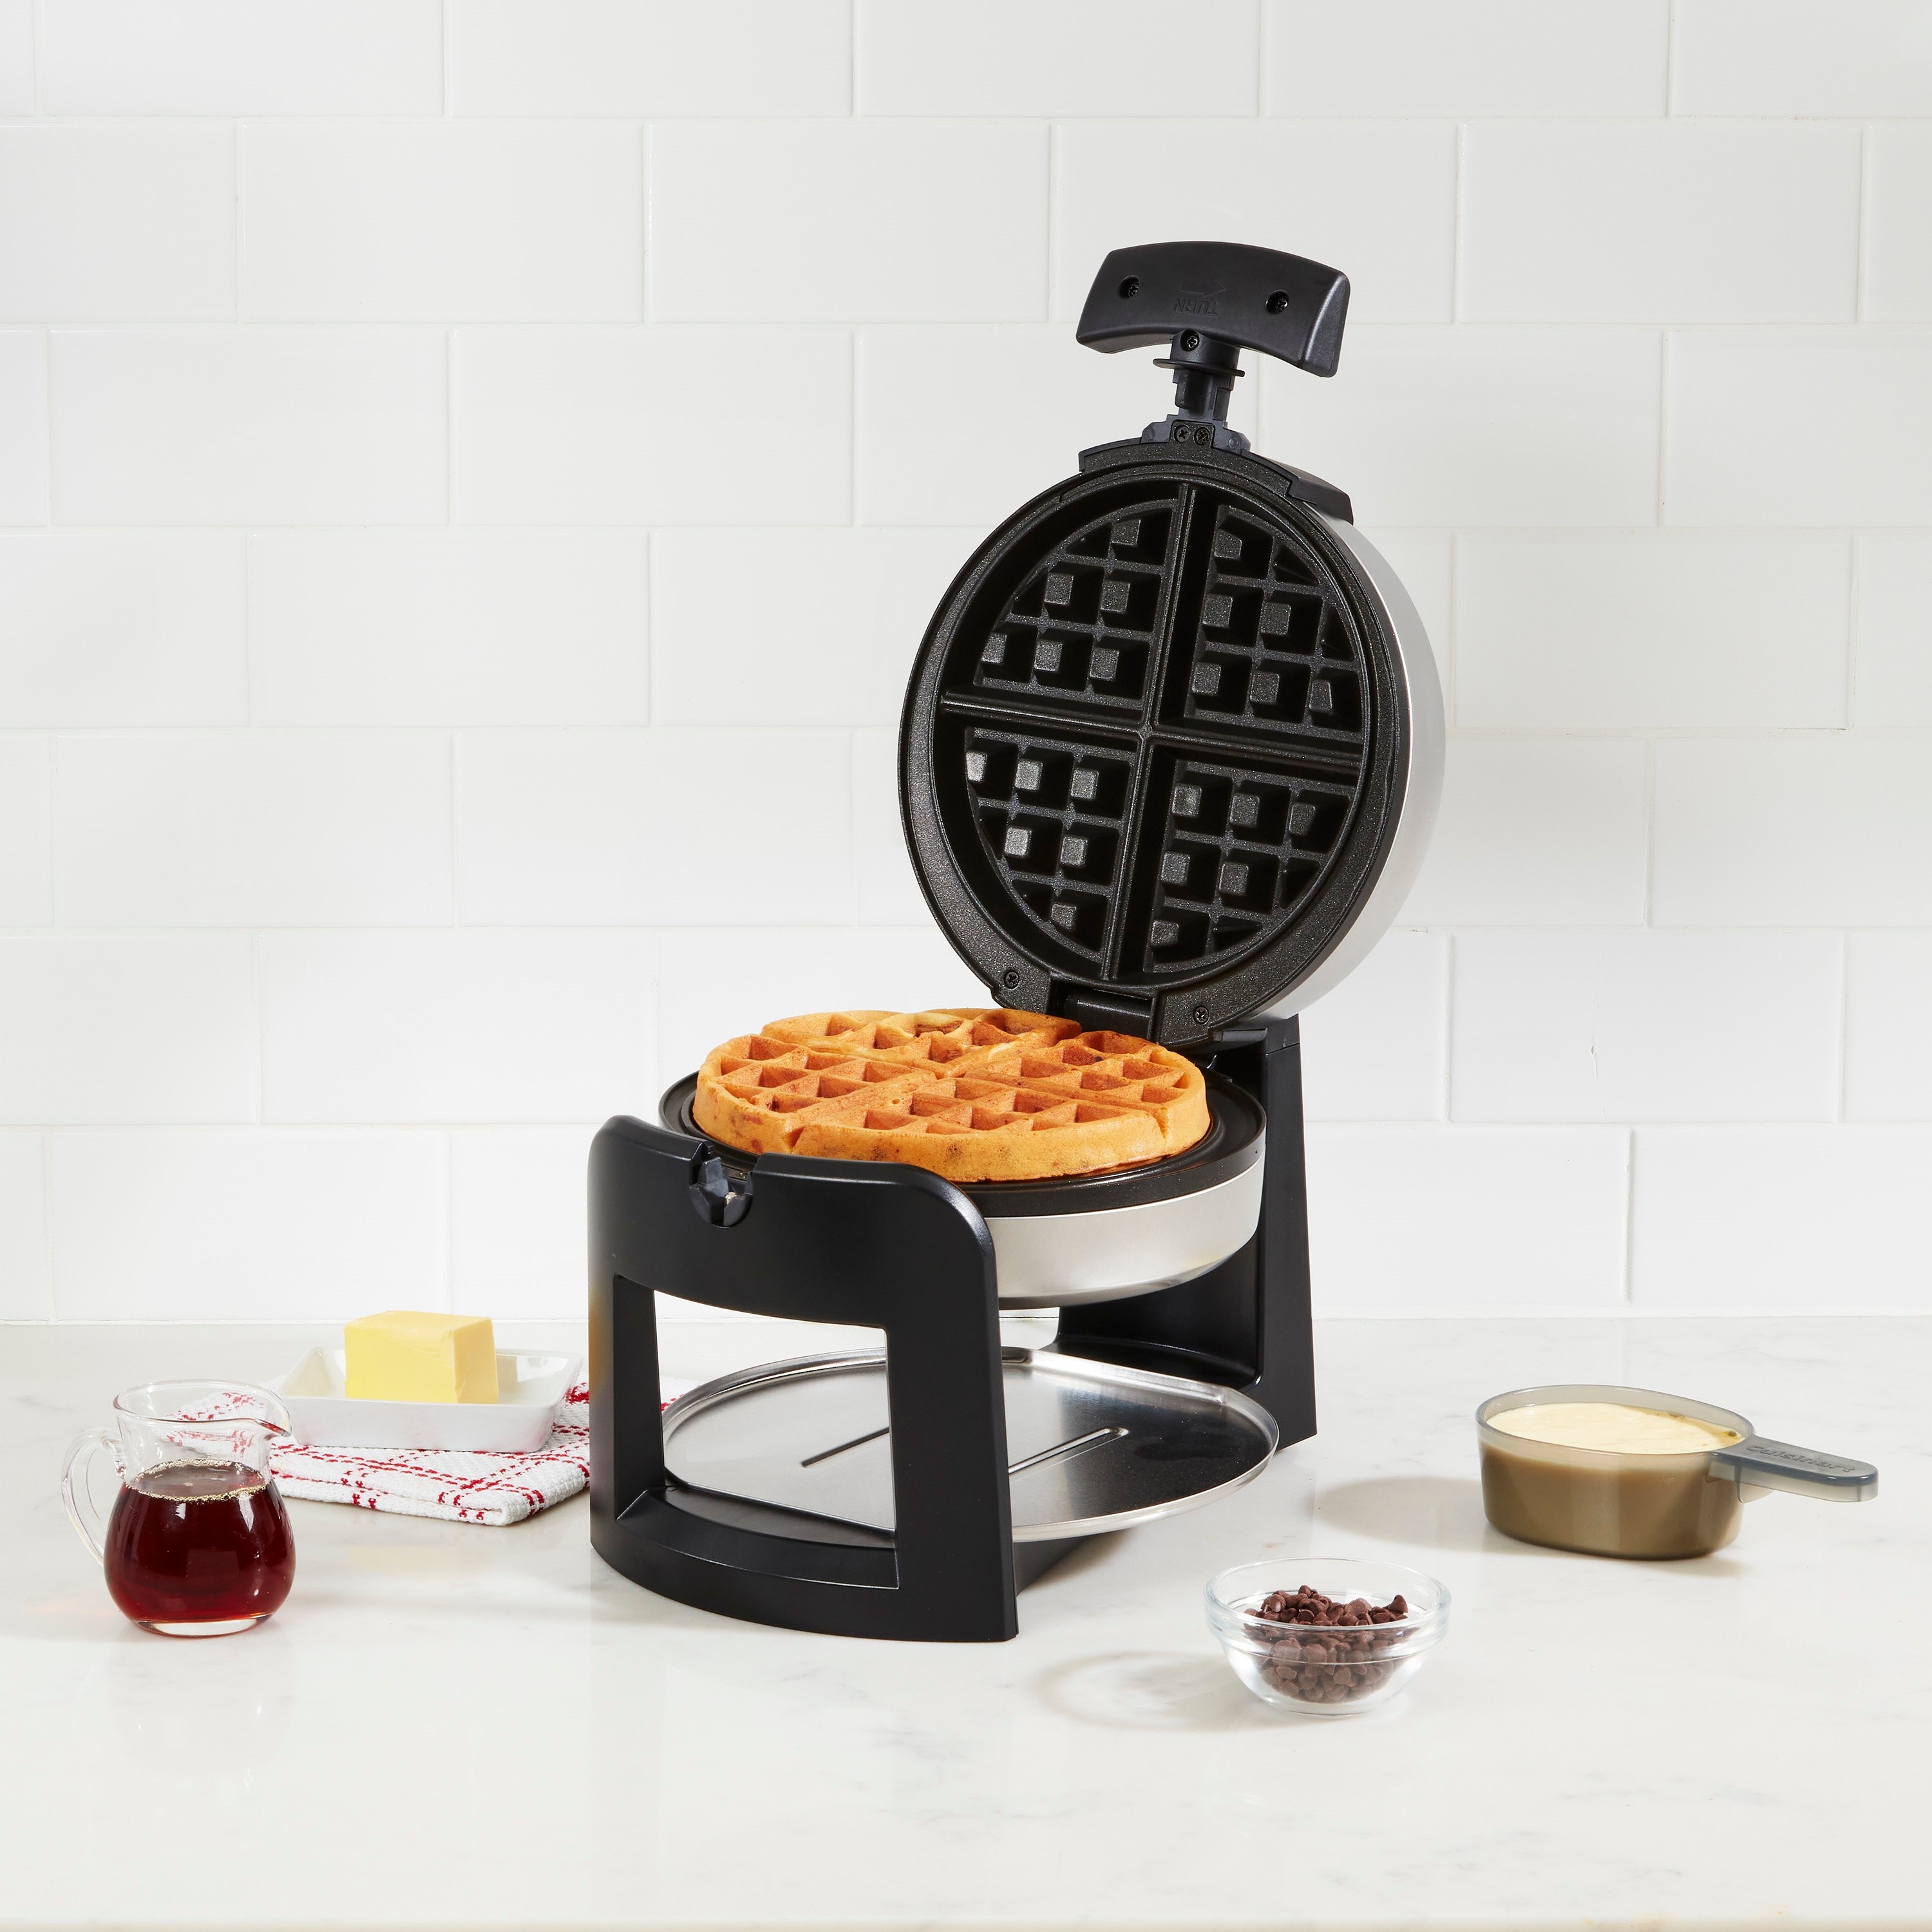 Cuisinart Waffle Makers & Waffle Irons Manuals and Product Help